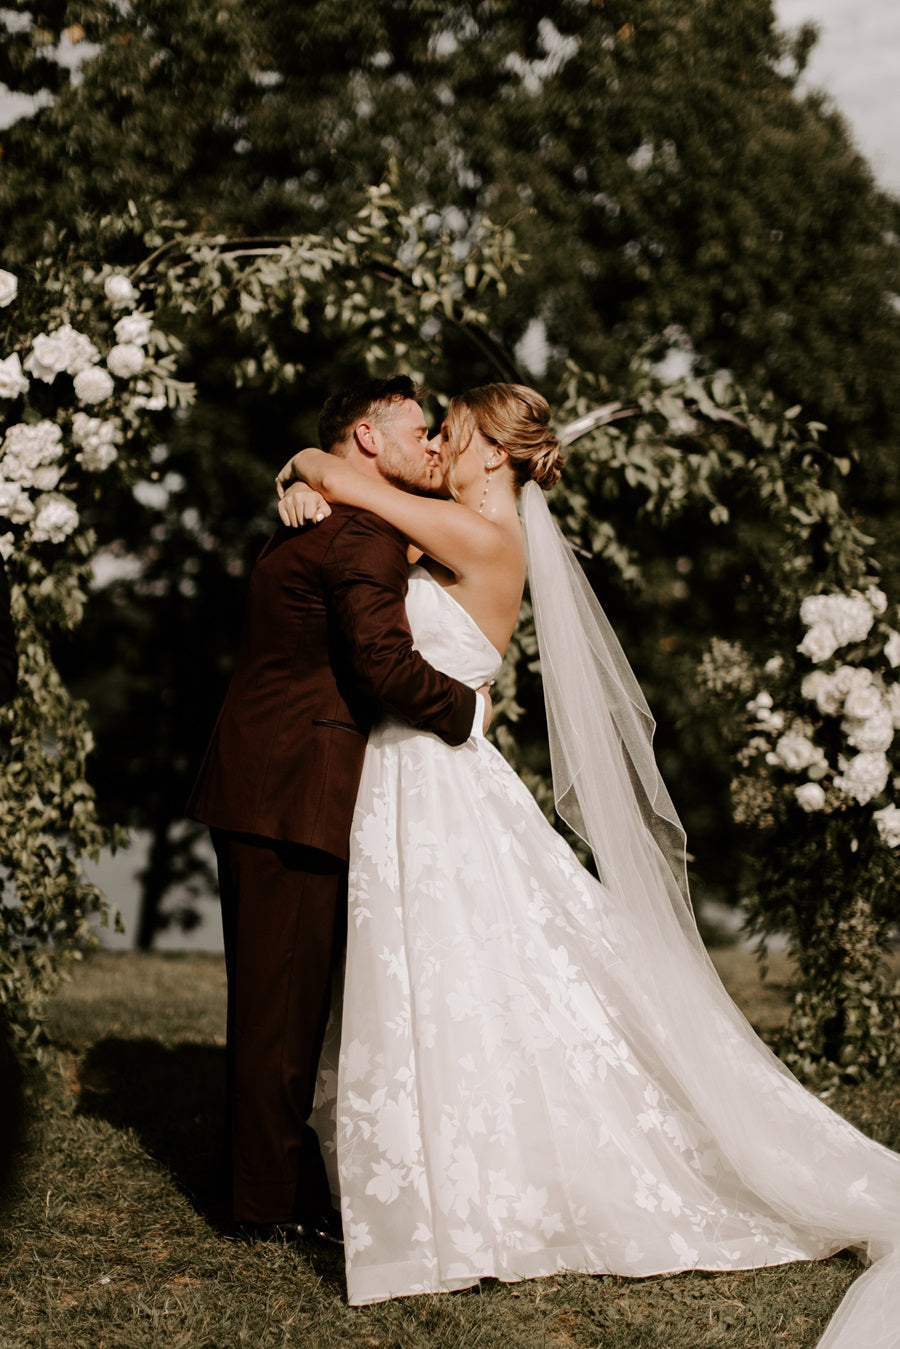 Bride and Groom embrace in front of the white and green floral archway